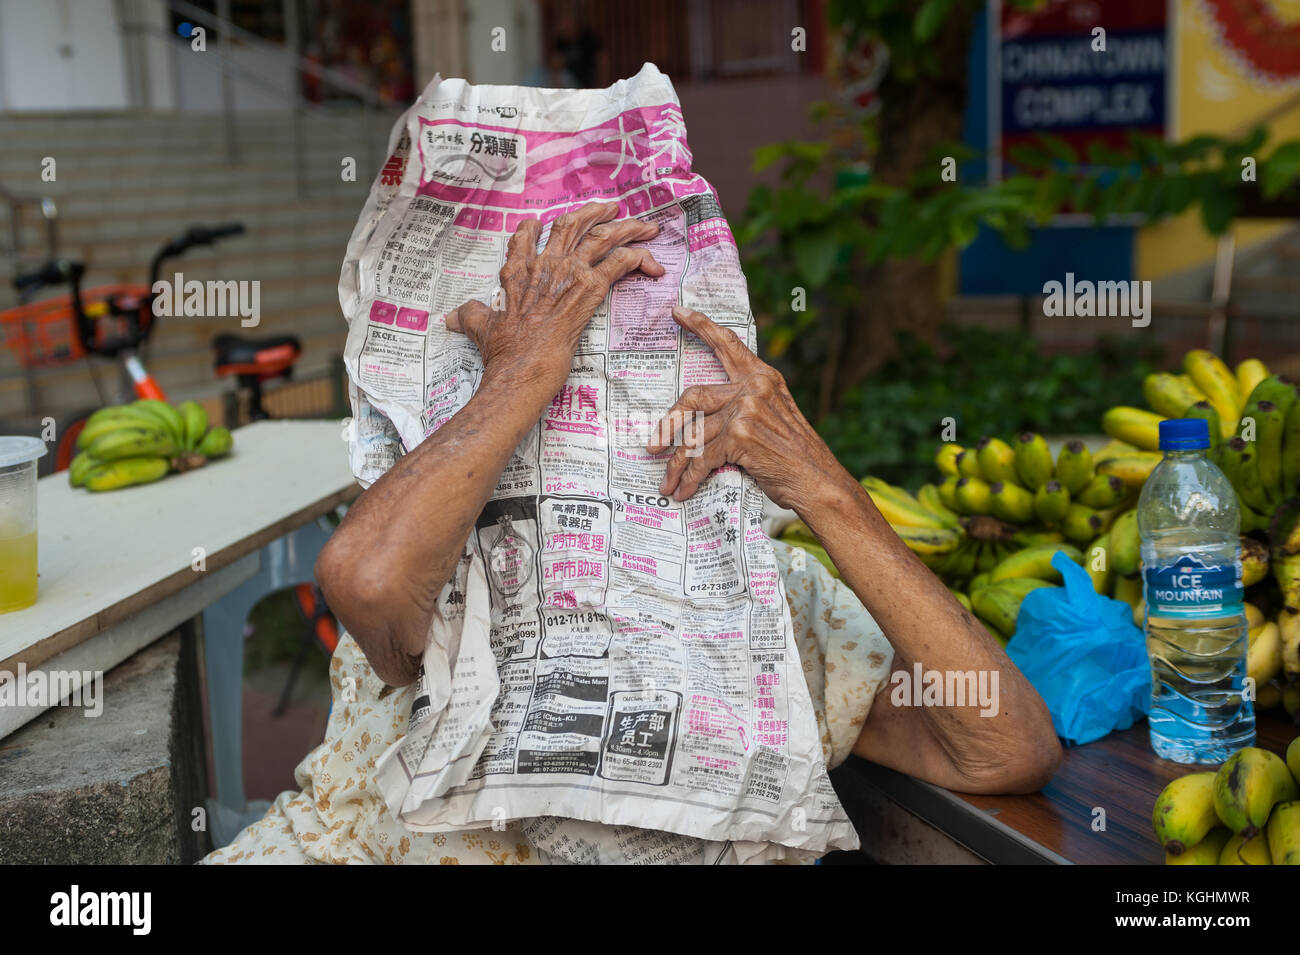 03.11.2017, Singapore, Republic of Singapore, Asia - An old woman who sells bananas in Singapore's Chinatown district hides behind a newspaper. Stock Photo